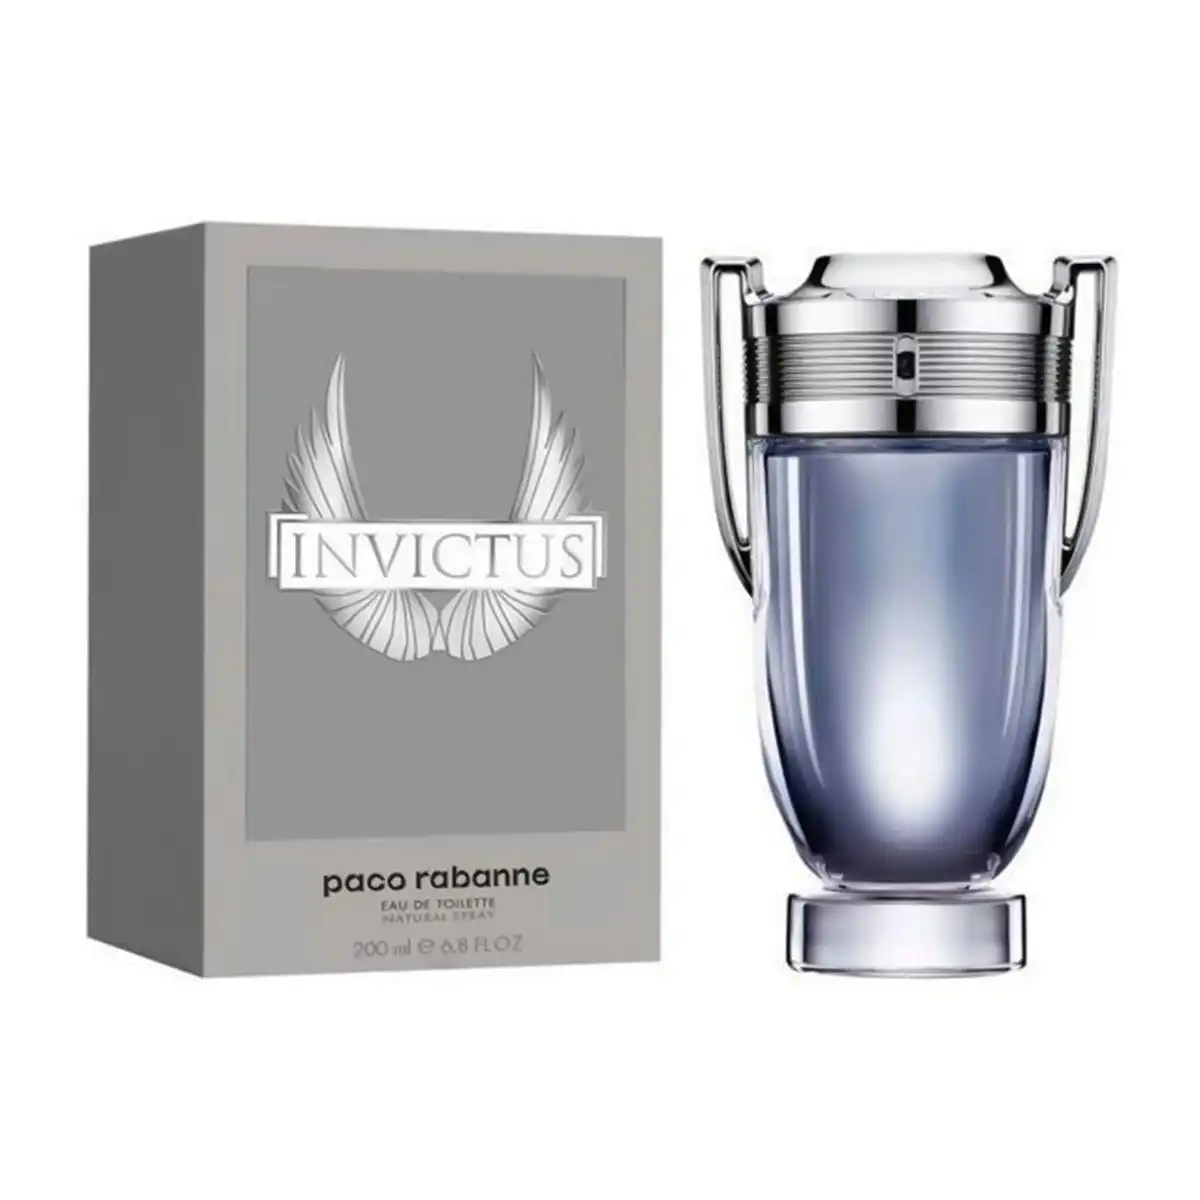 Invictus 200ml EDT By Paco Rabanne (Mens)